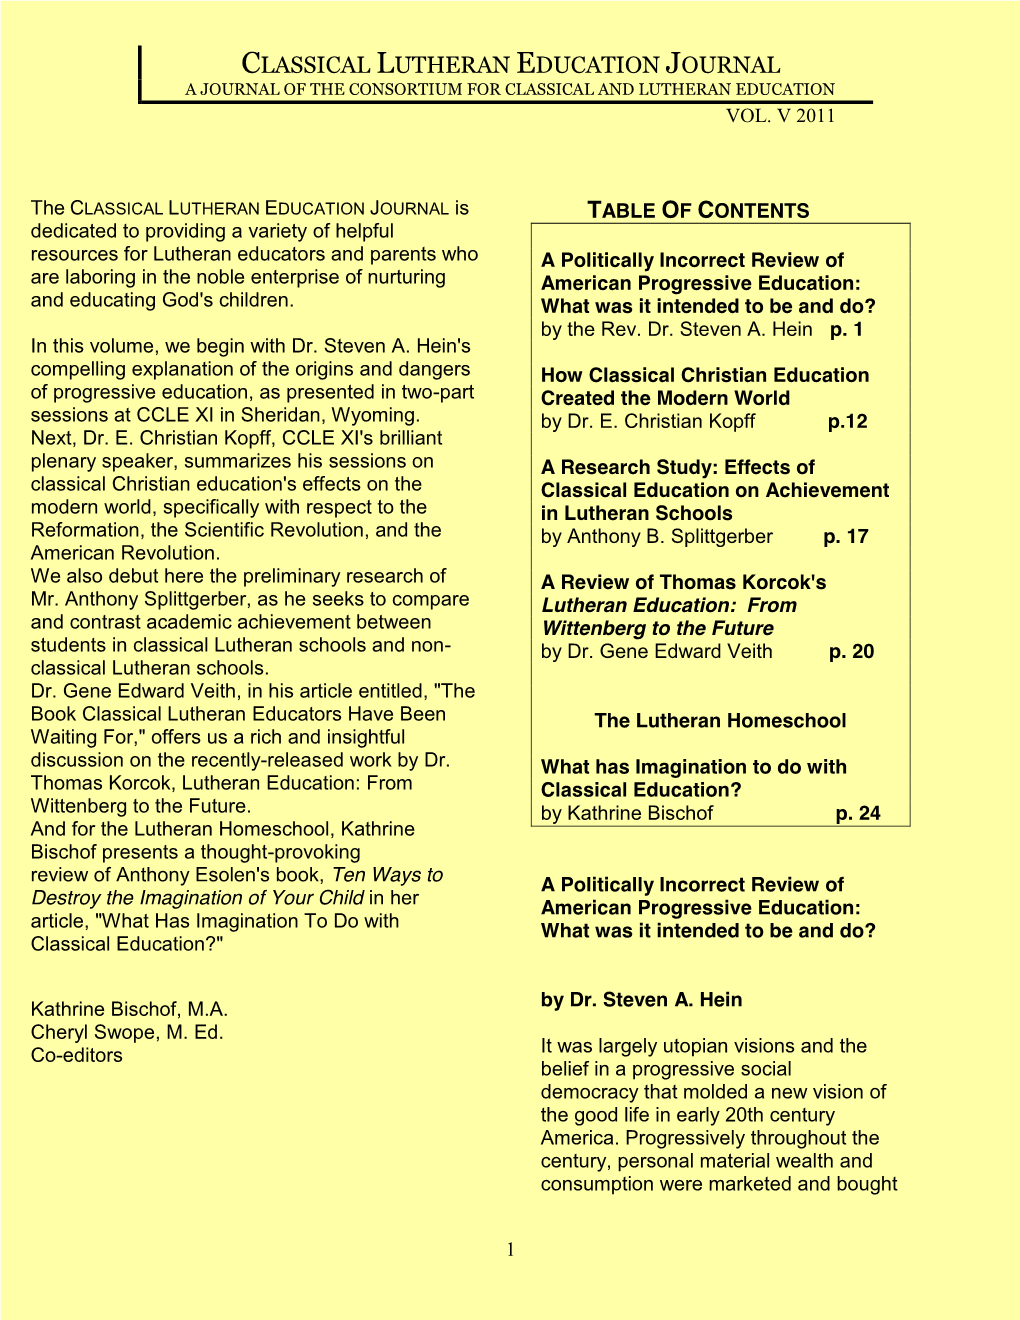 Classical Lutheran Education Journal a Journal of the Consortium for Classical and Lutheran Education Vol